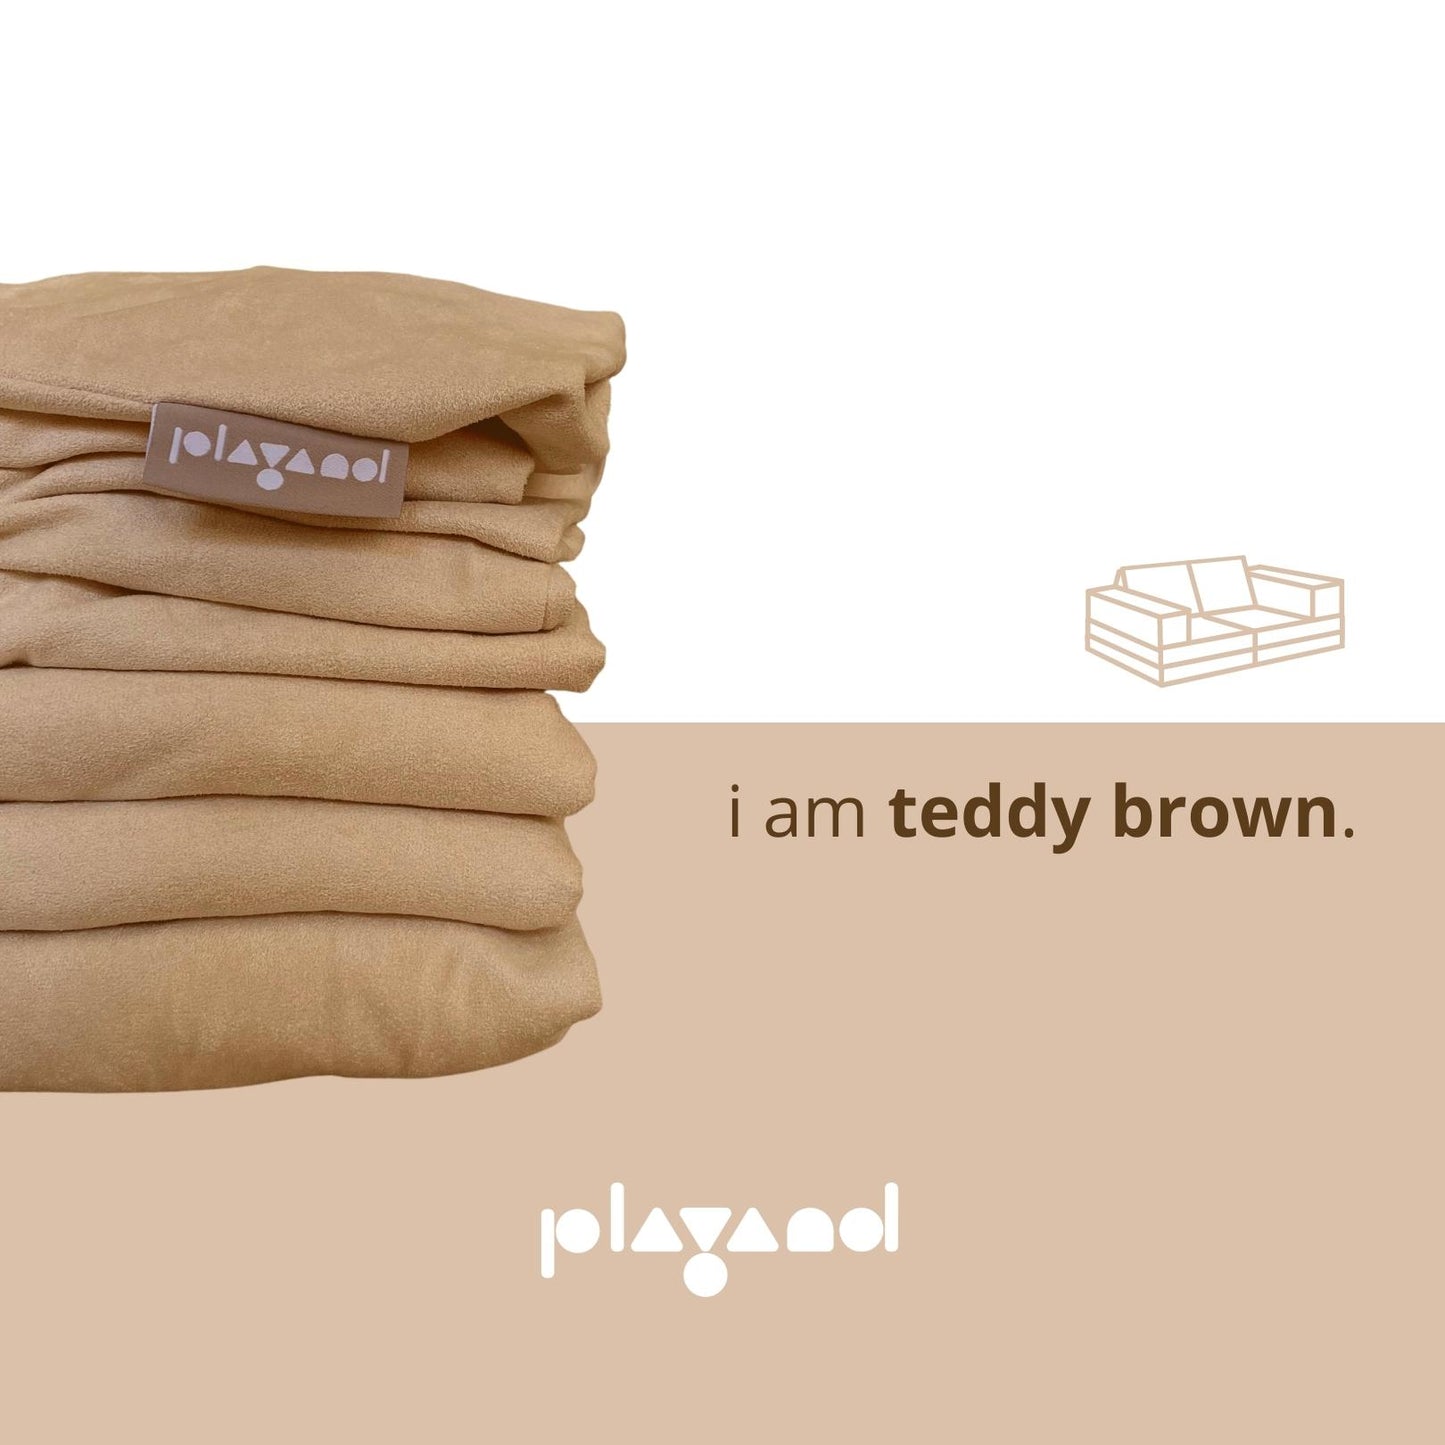 Playand Sofa Series Cover In Teddy Brown